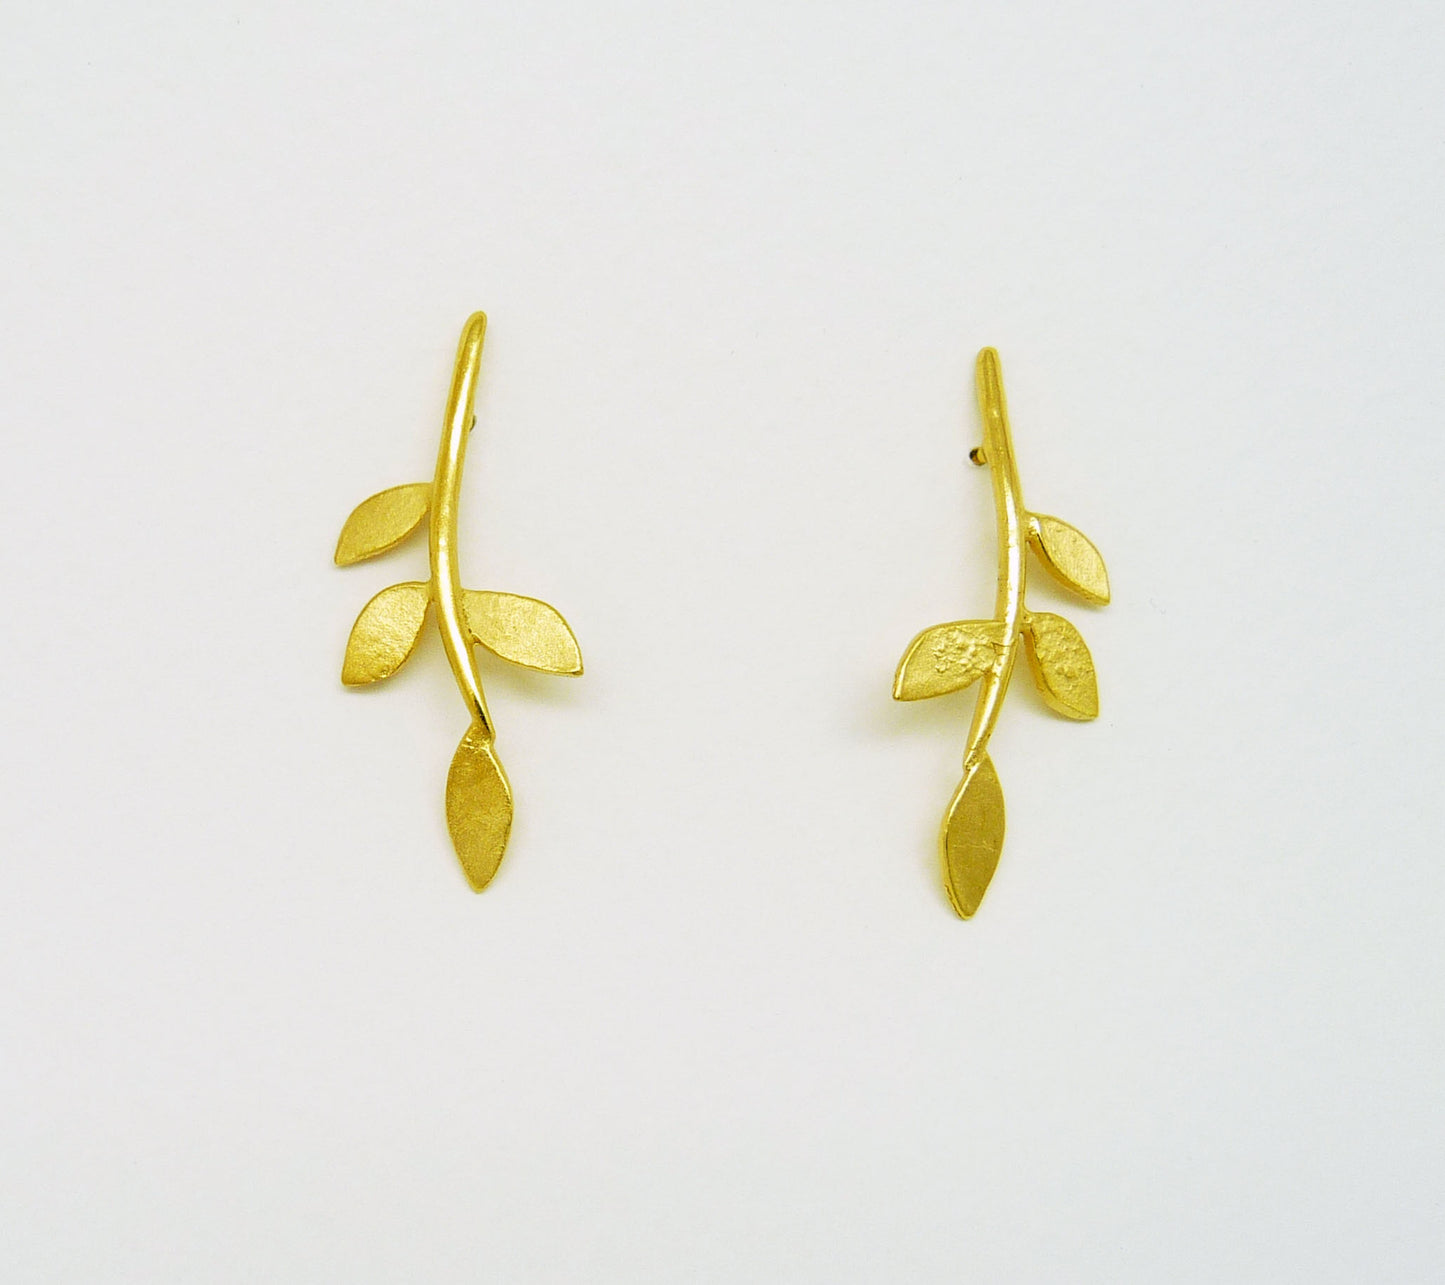 Blossoming, branch, jewellery, jewelry, earrings, studs, sterling, silver, 18ct, gold, nature, natural